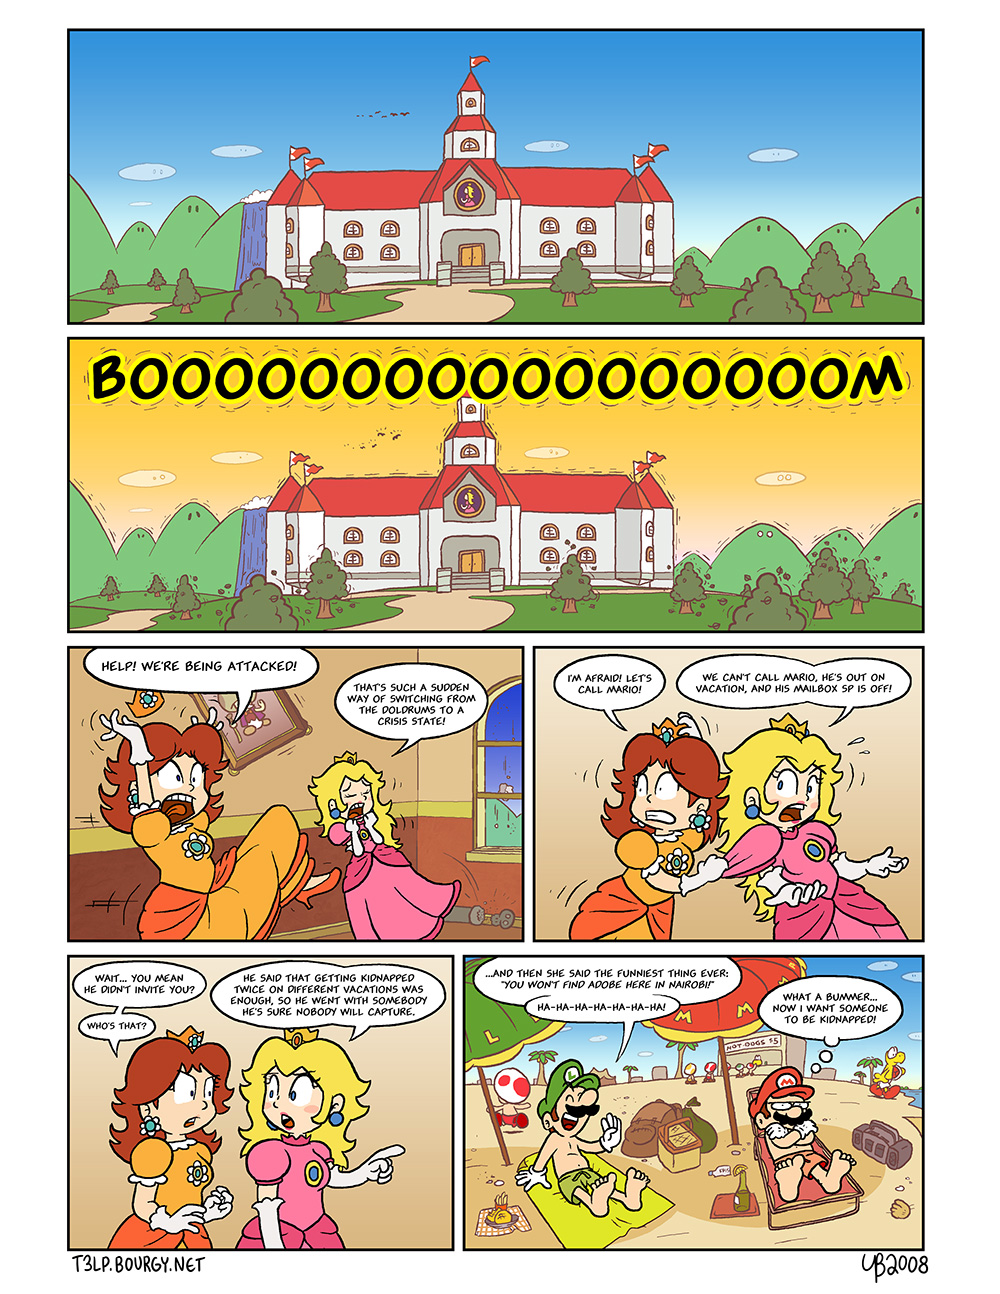 Part 1 – Page 1